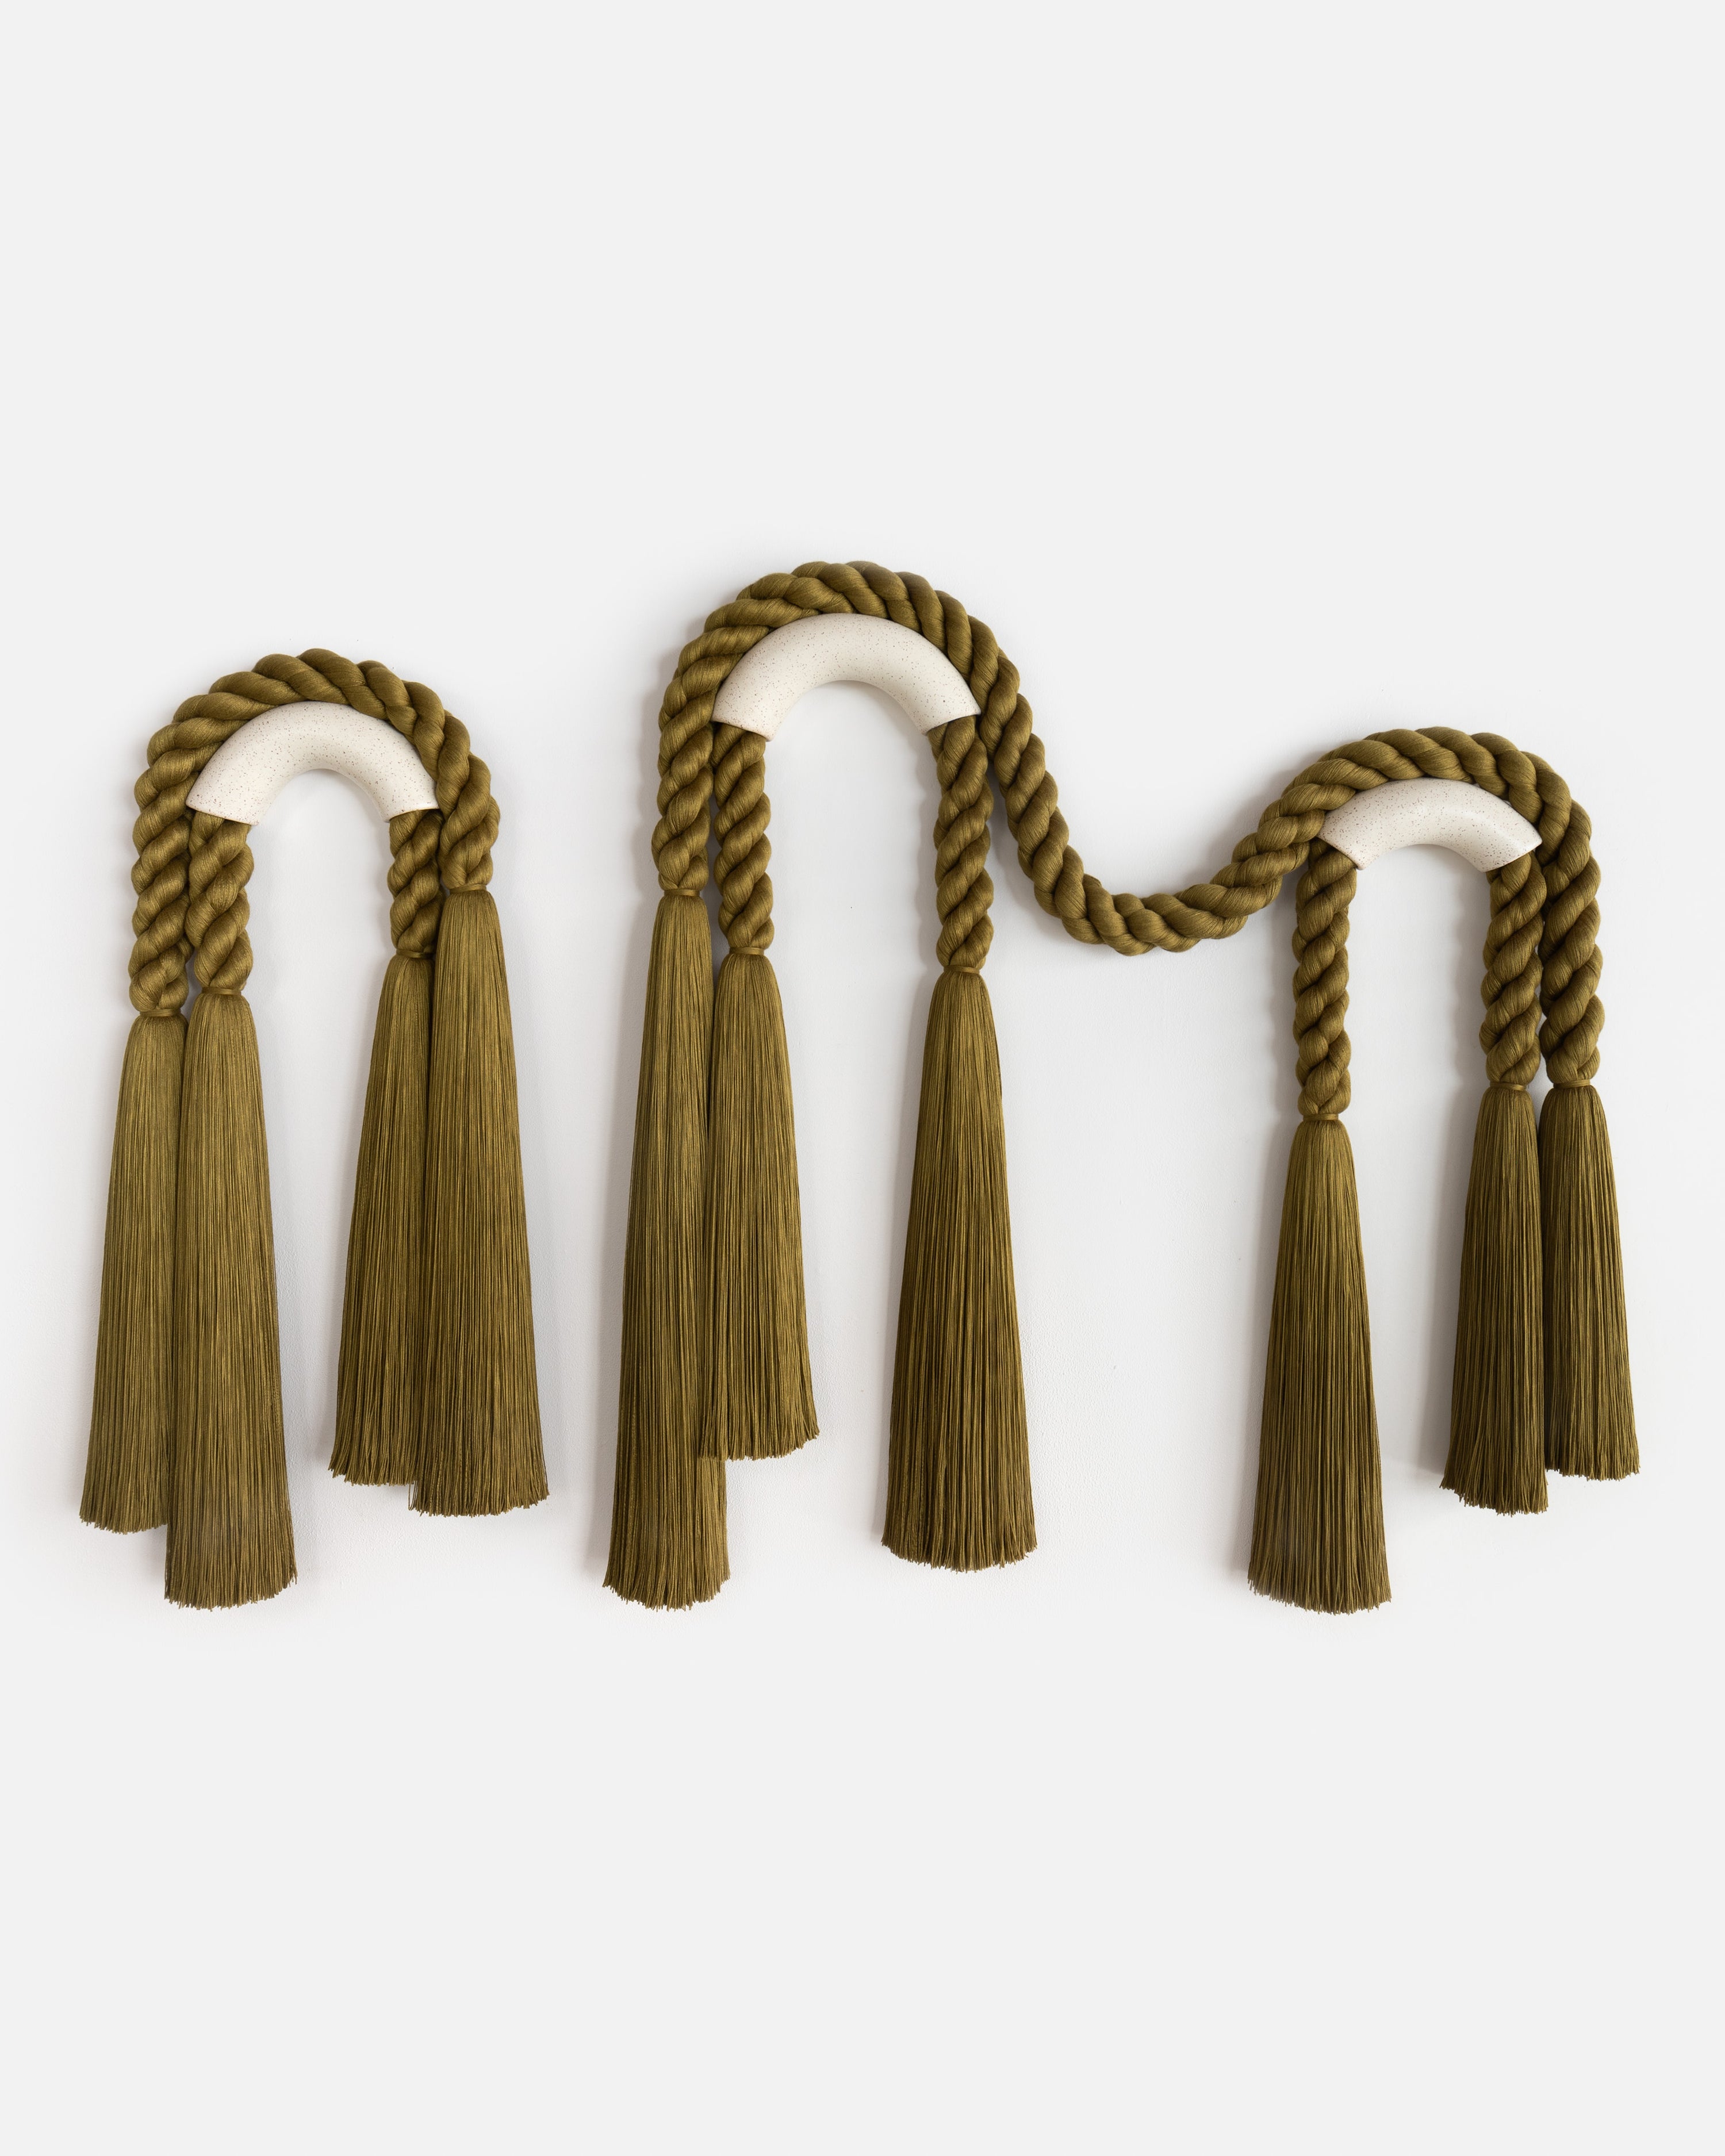 Large Off-White Ceramic Archway Series (Olive Rope)